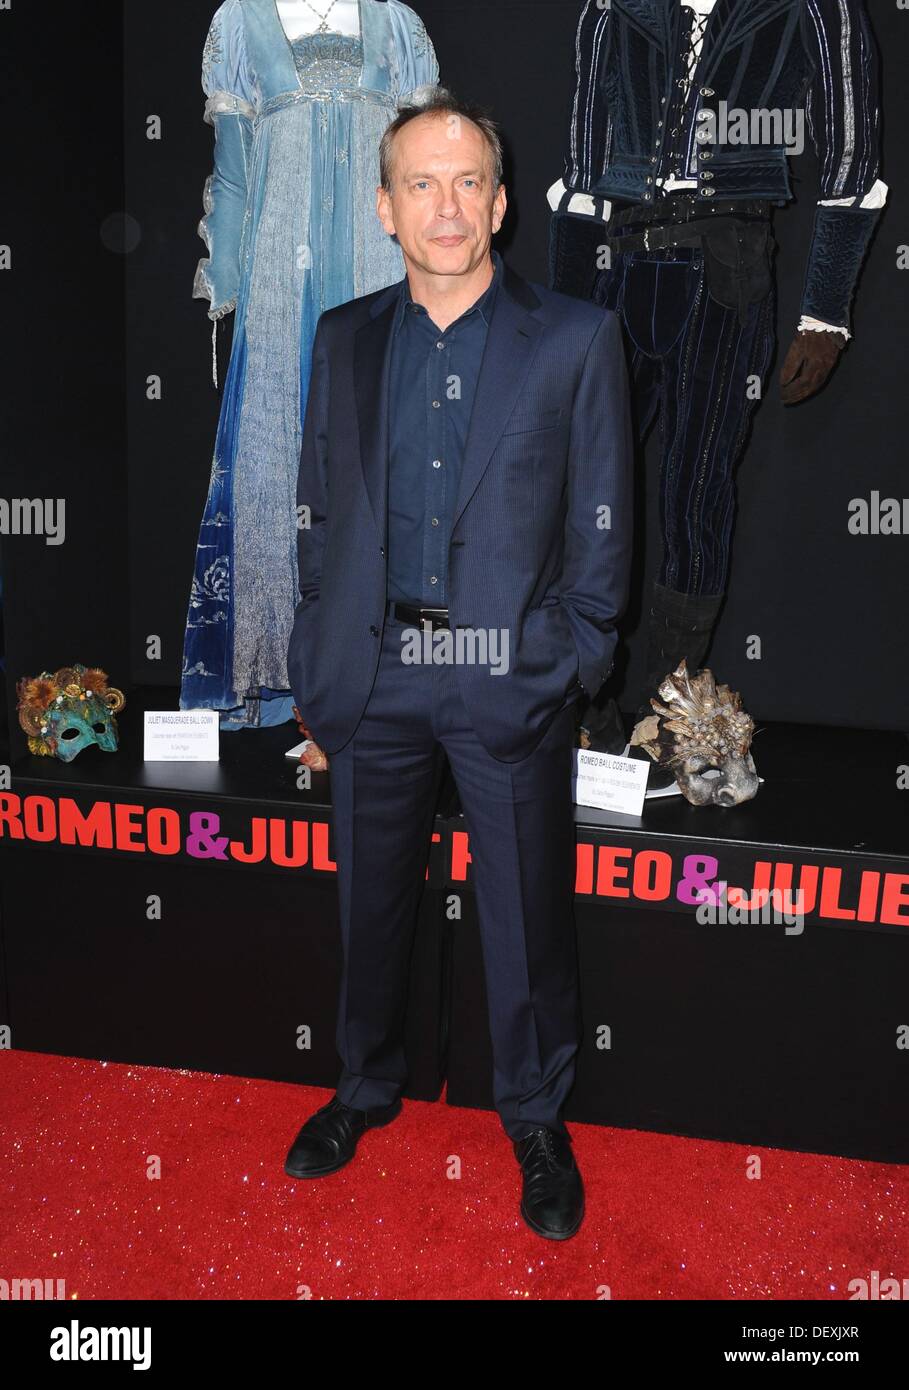 Los Angeles, CA. 24th Sep, 2013. Tomas Arana at arrivals for ROMEO AND JULIET Premiere, ArcLight Hollywood, Los Angeles, CA September 24, 2013. © Dee Cercone/Everett Collection/Alamy Live News Stock Photo